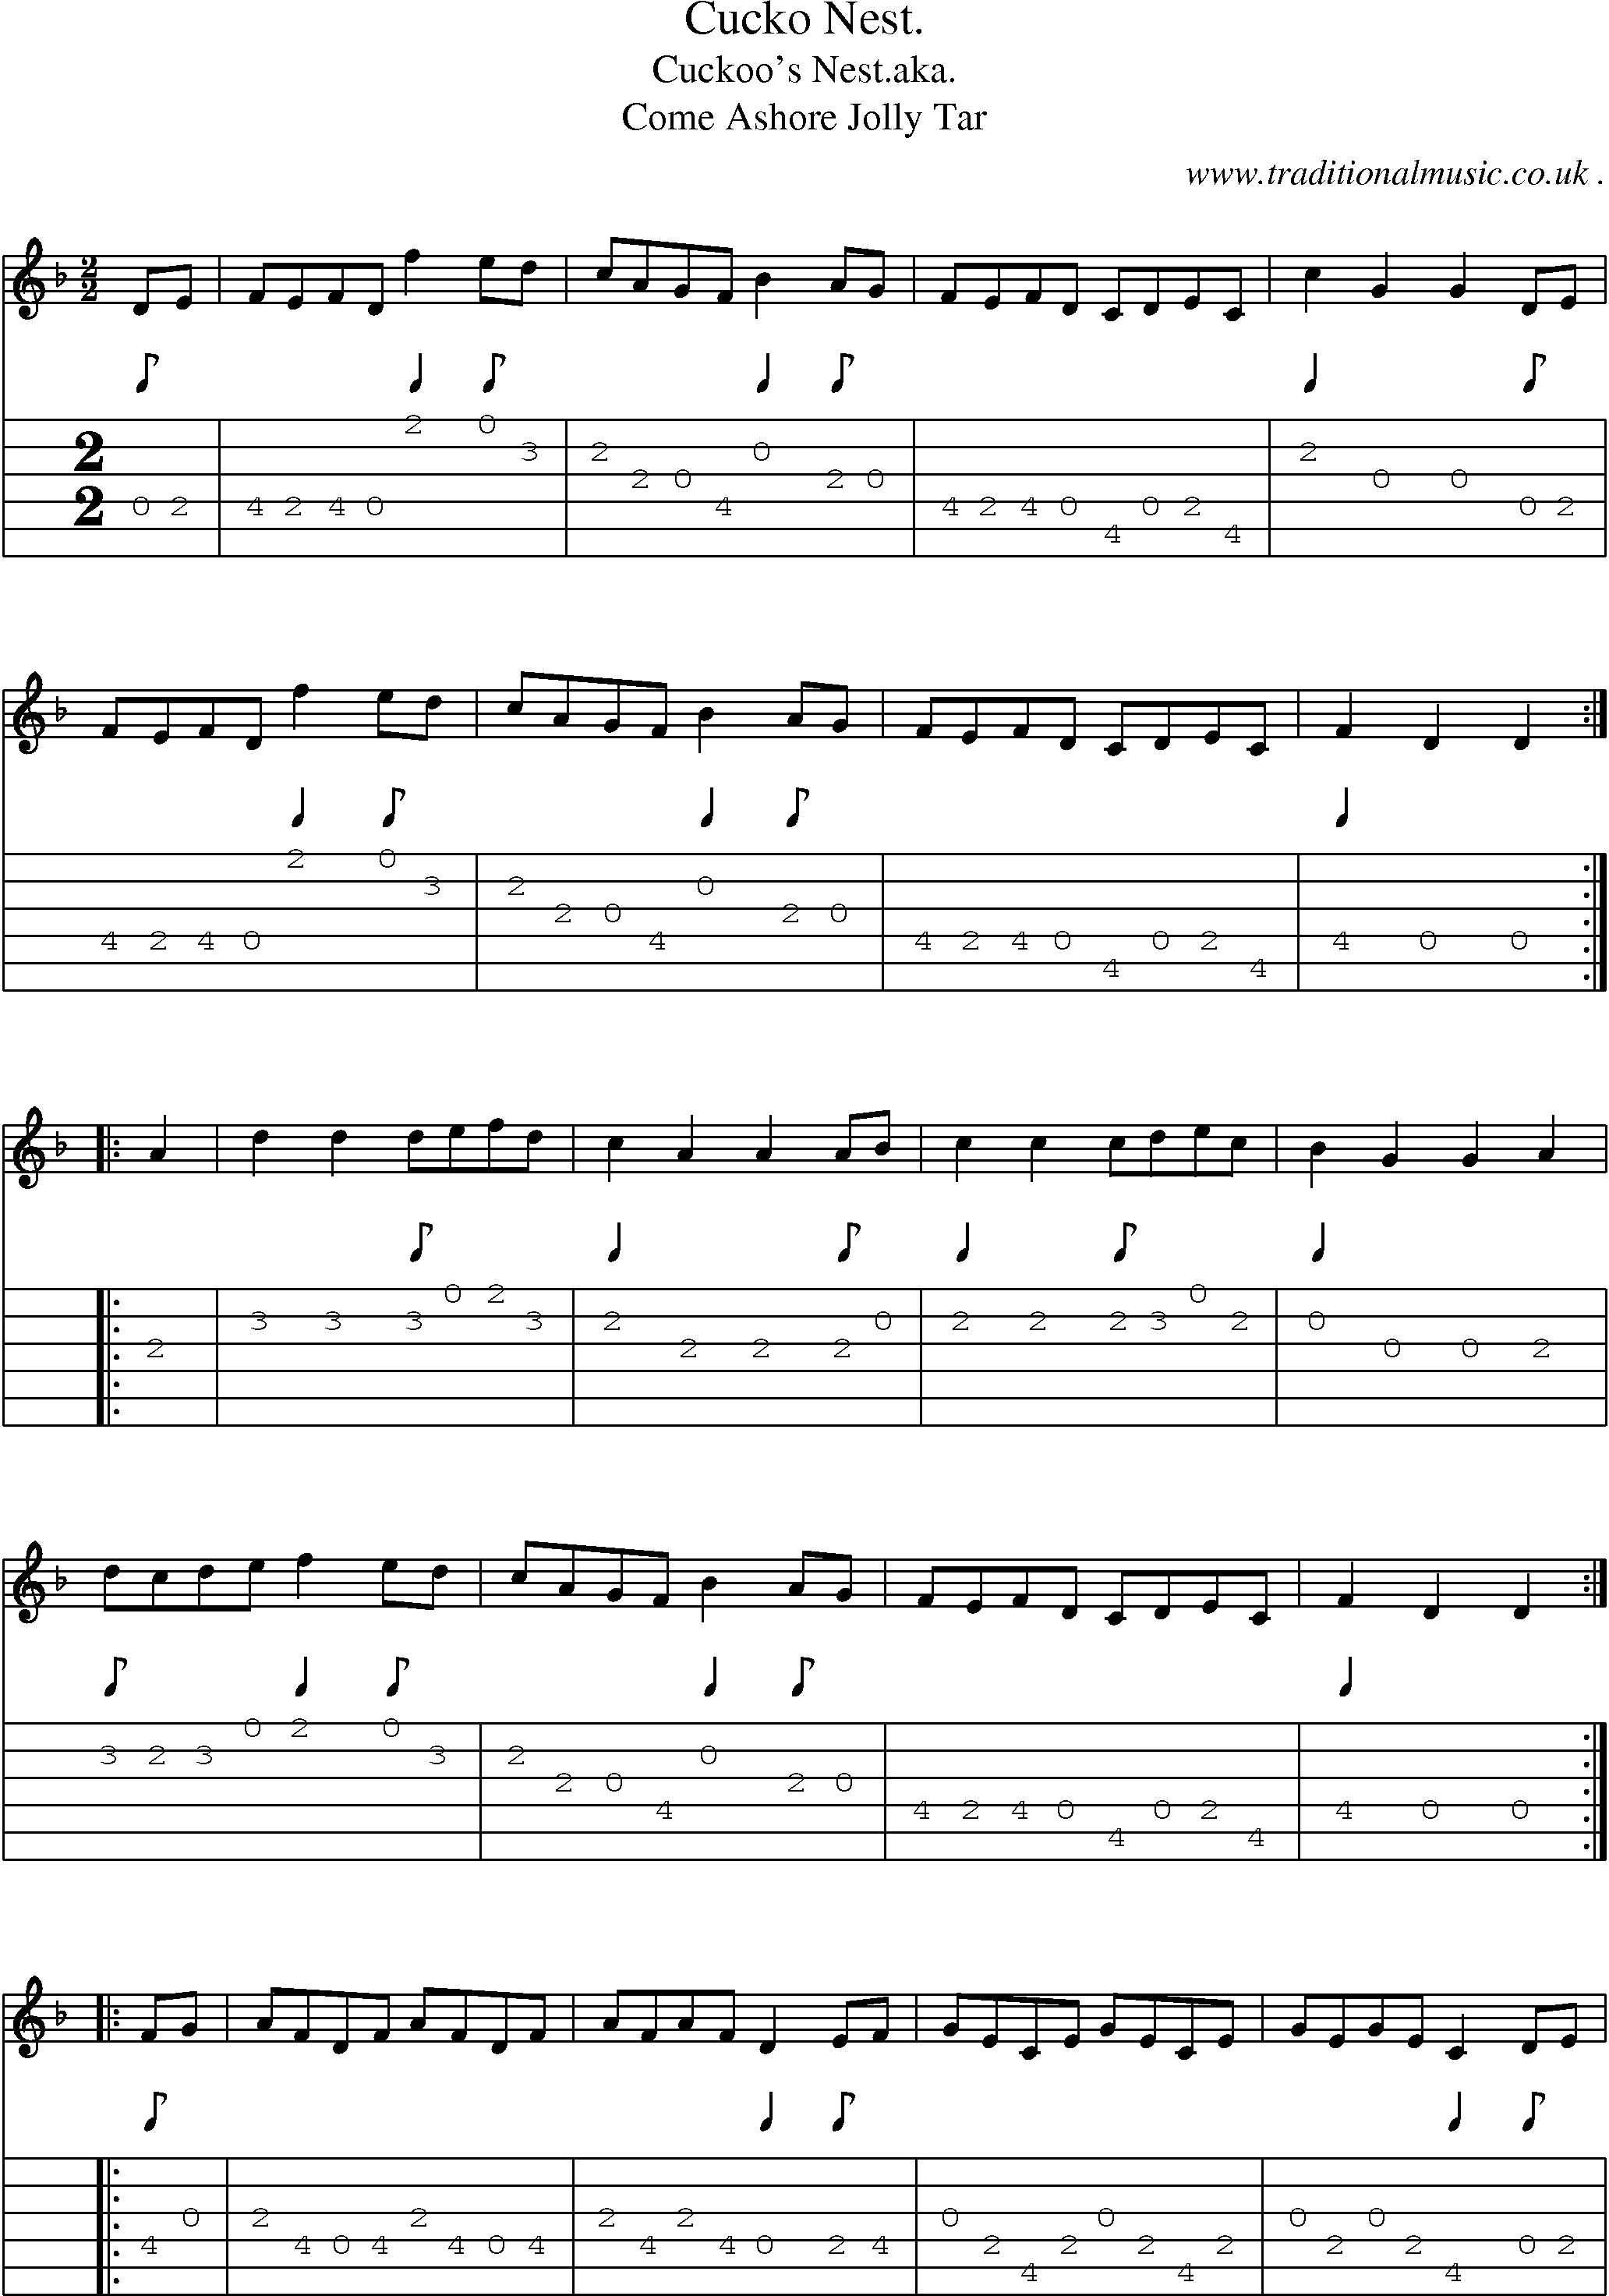 Sheet-Music and Guitar Tabs for Cucko Nest